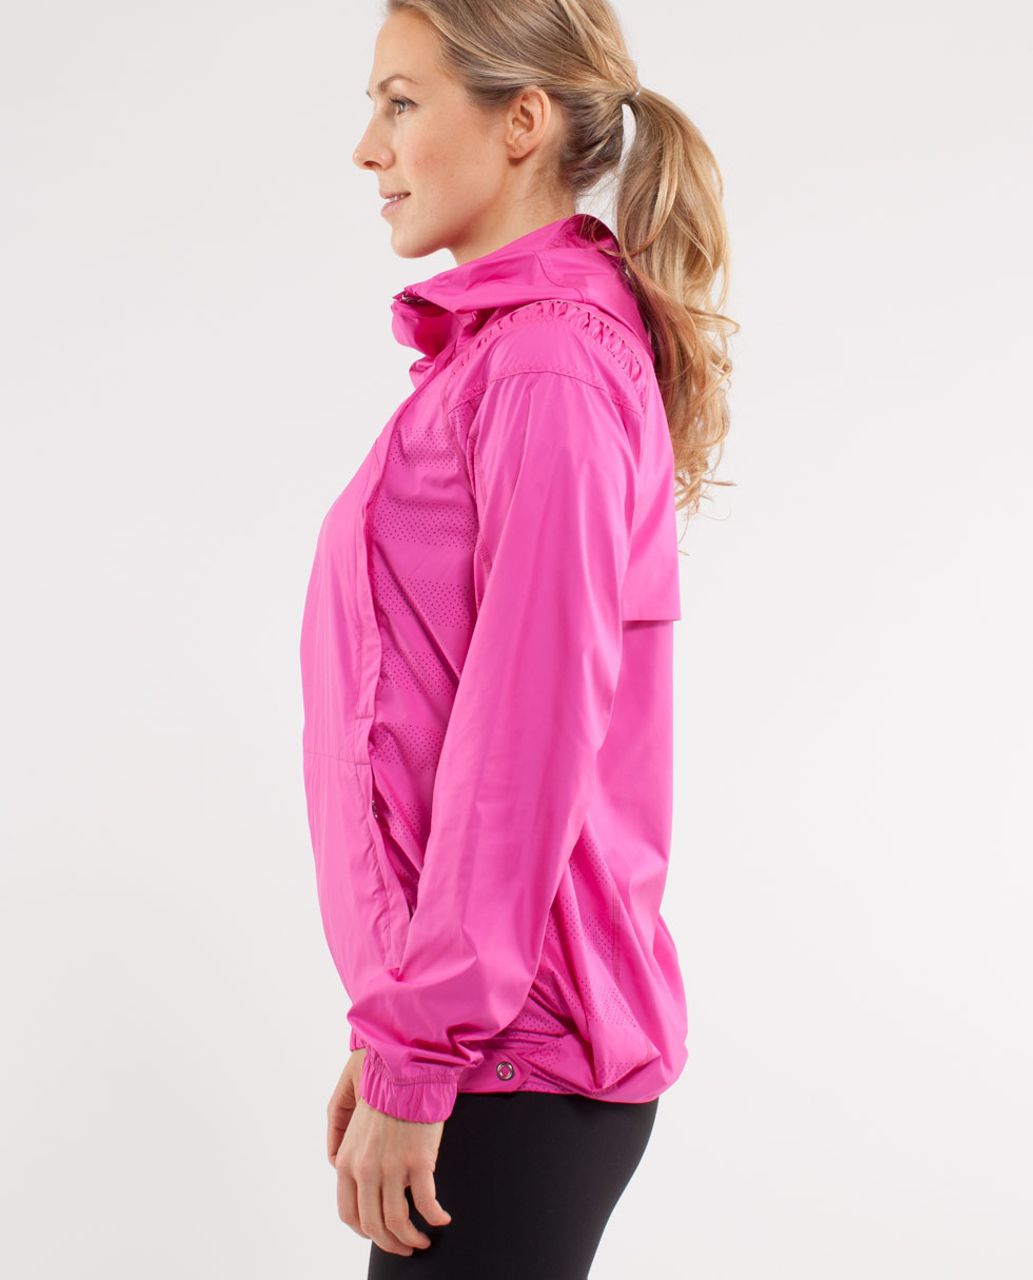 Lululemon Pack and Go Pullover - Paris Pink